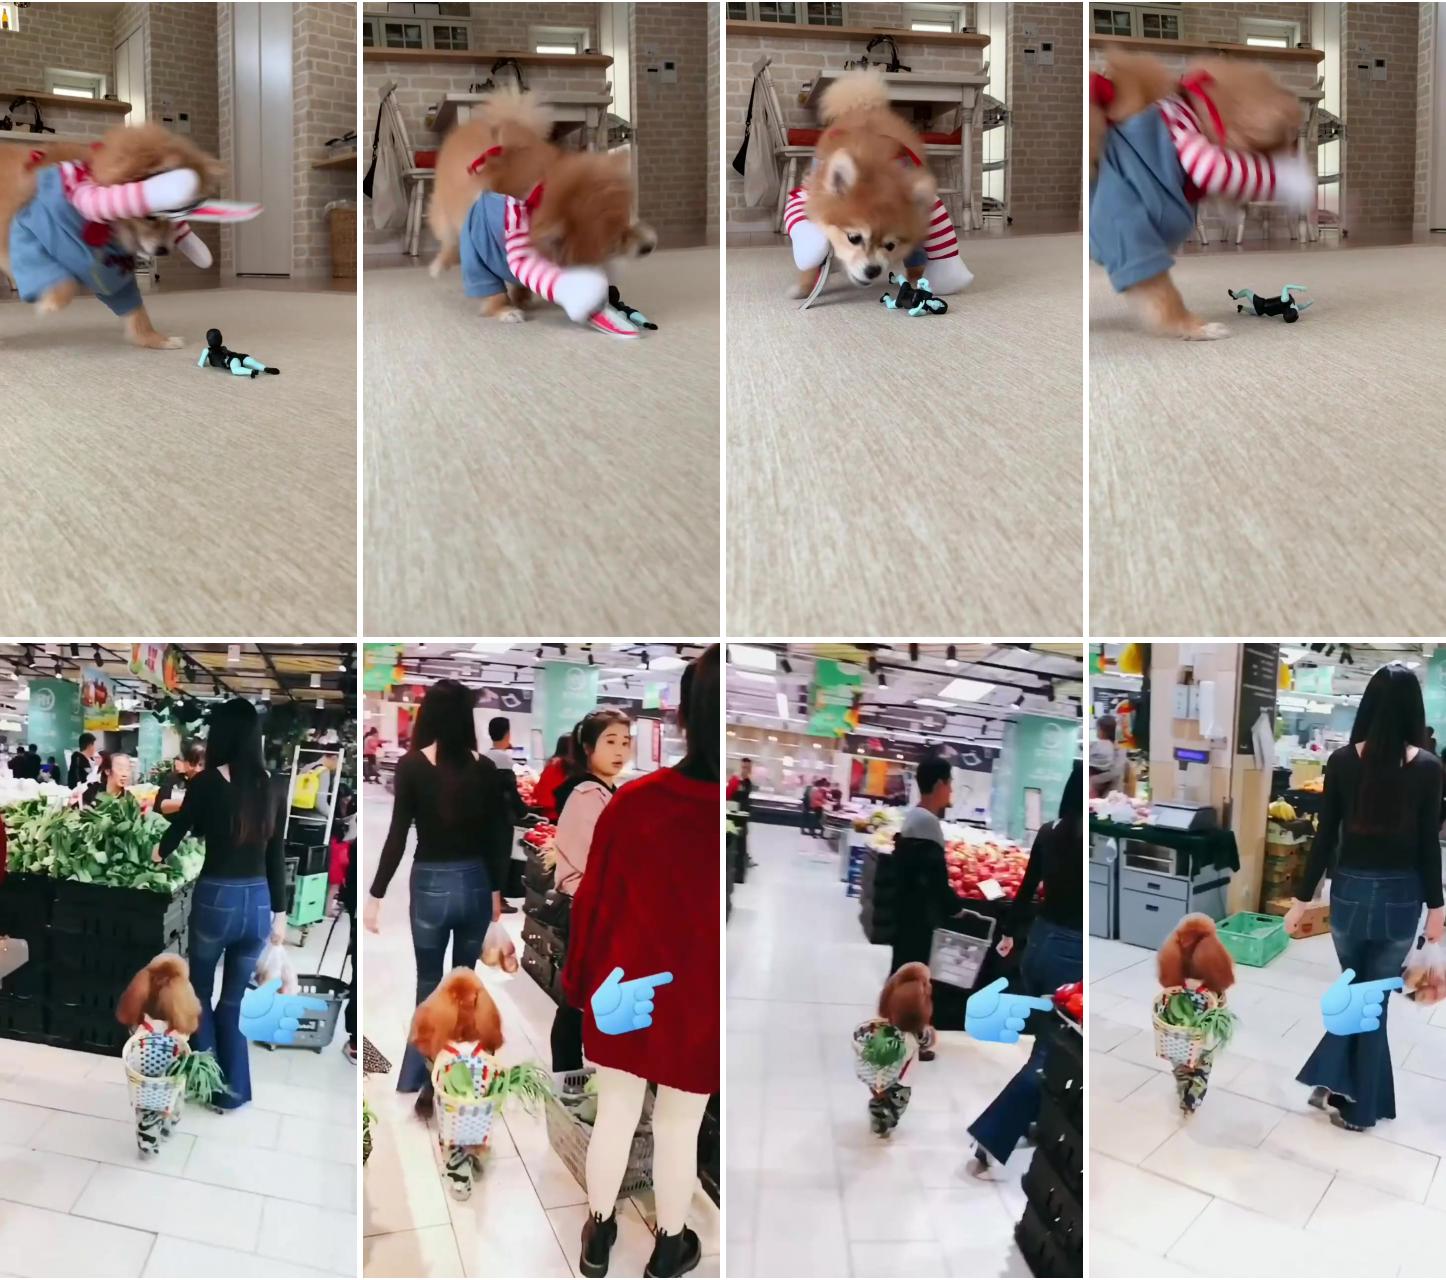 My funny dog; let go mma for groceries shopping #cutedog